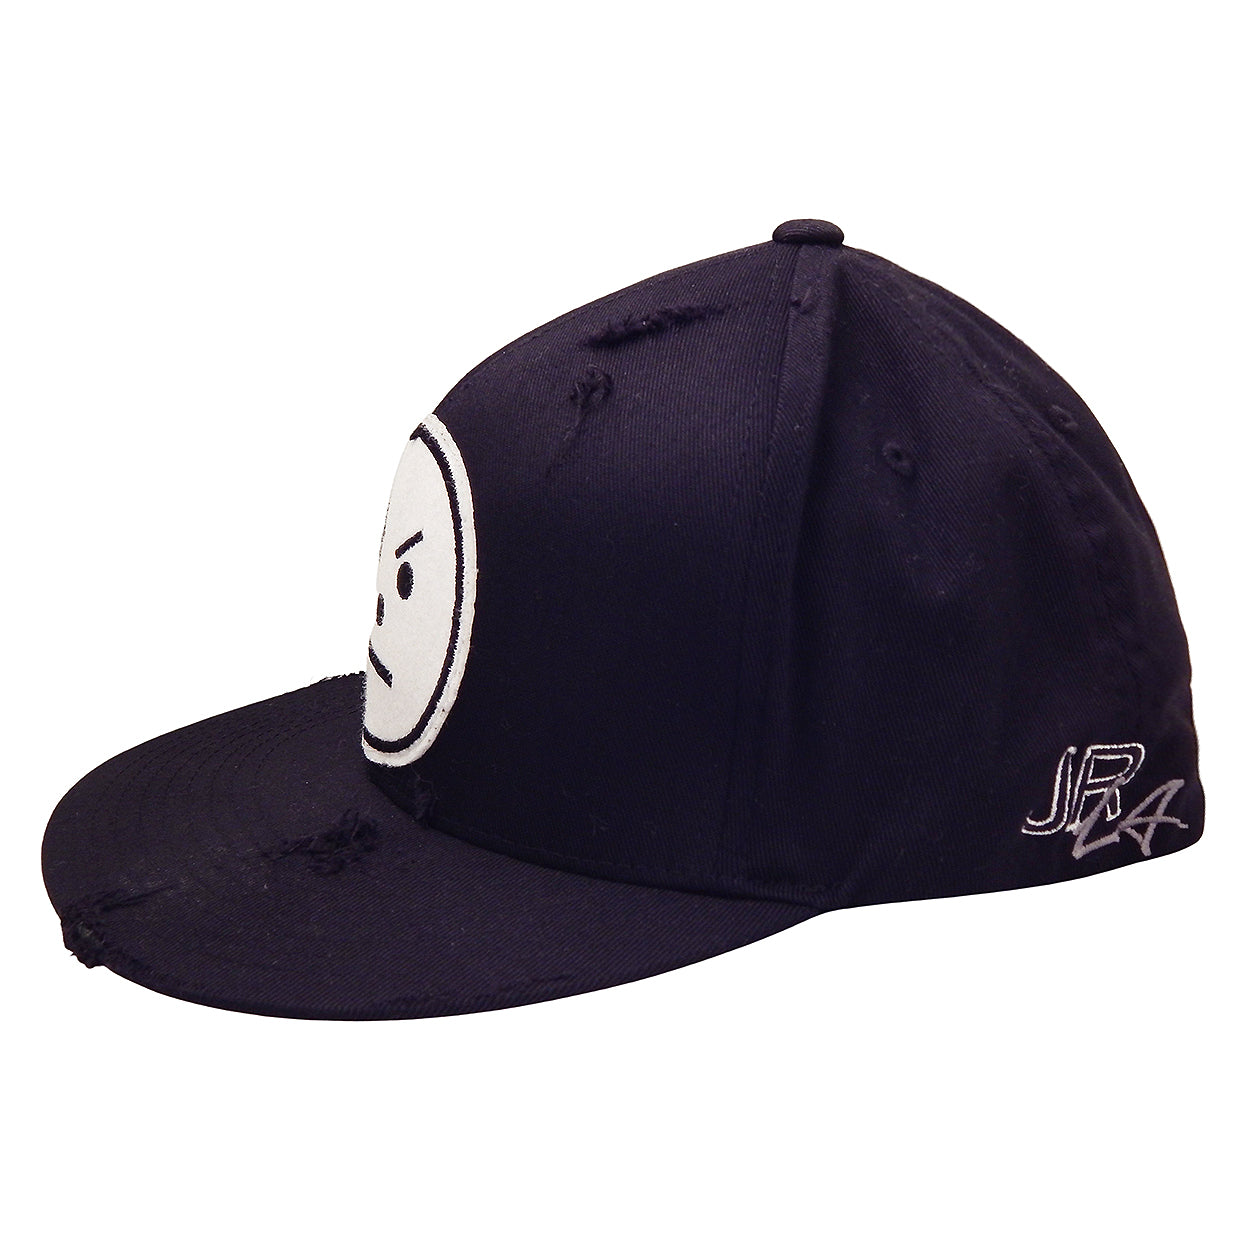 J. Ransom Collection - &quot;SERIOUS SNOWMAN&quot; Flat Billed Hat in White on Black